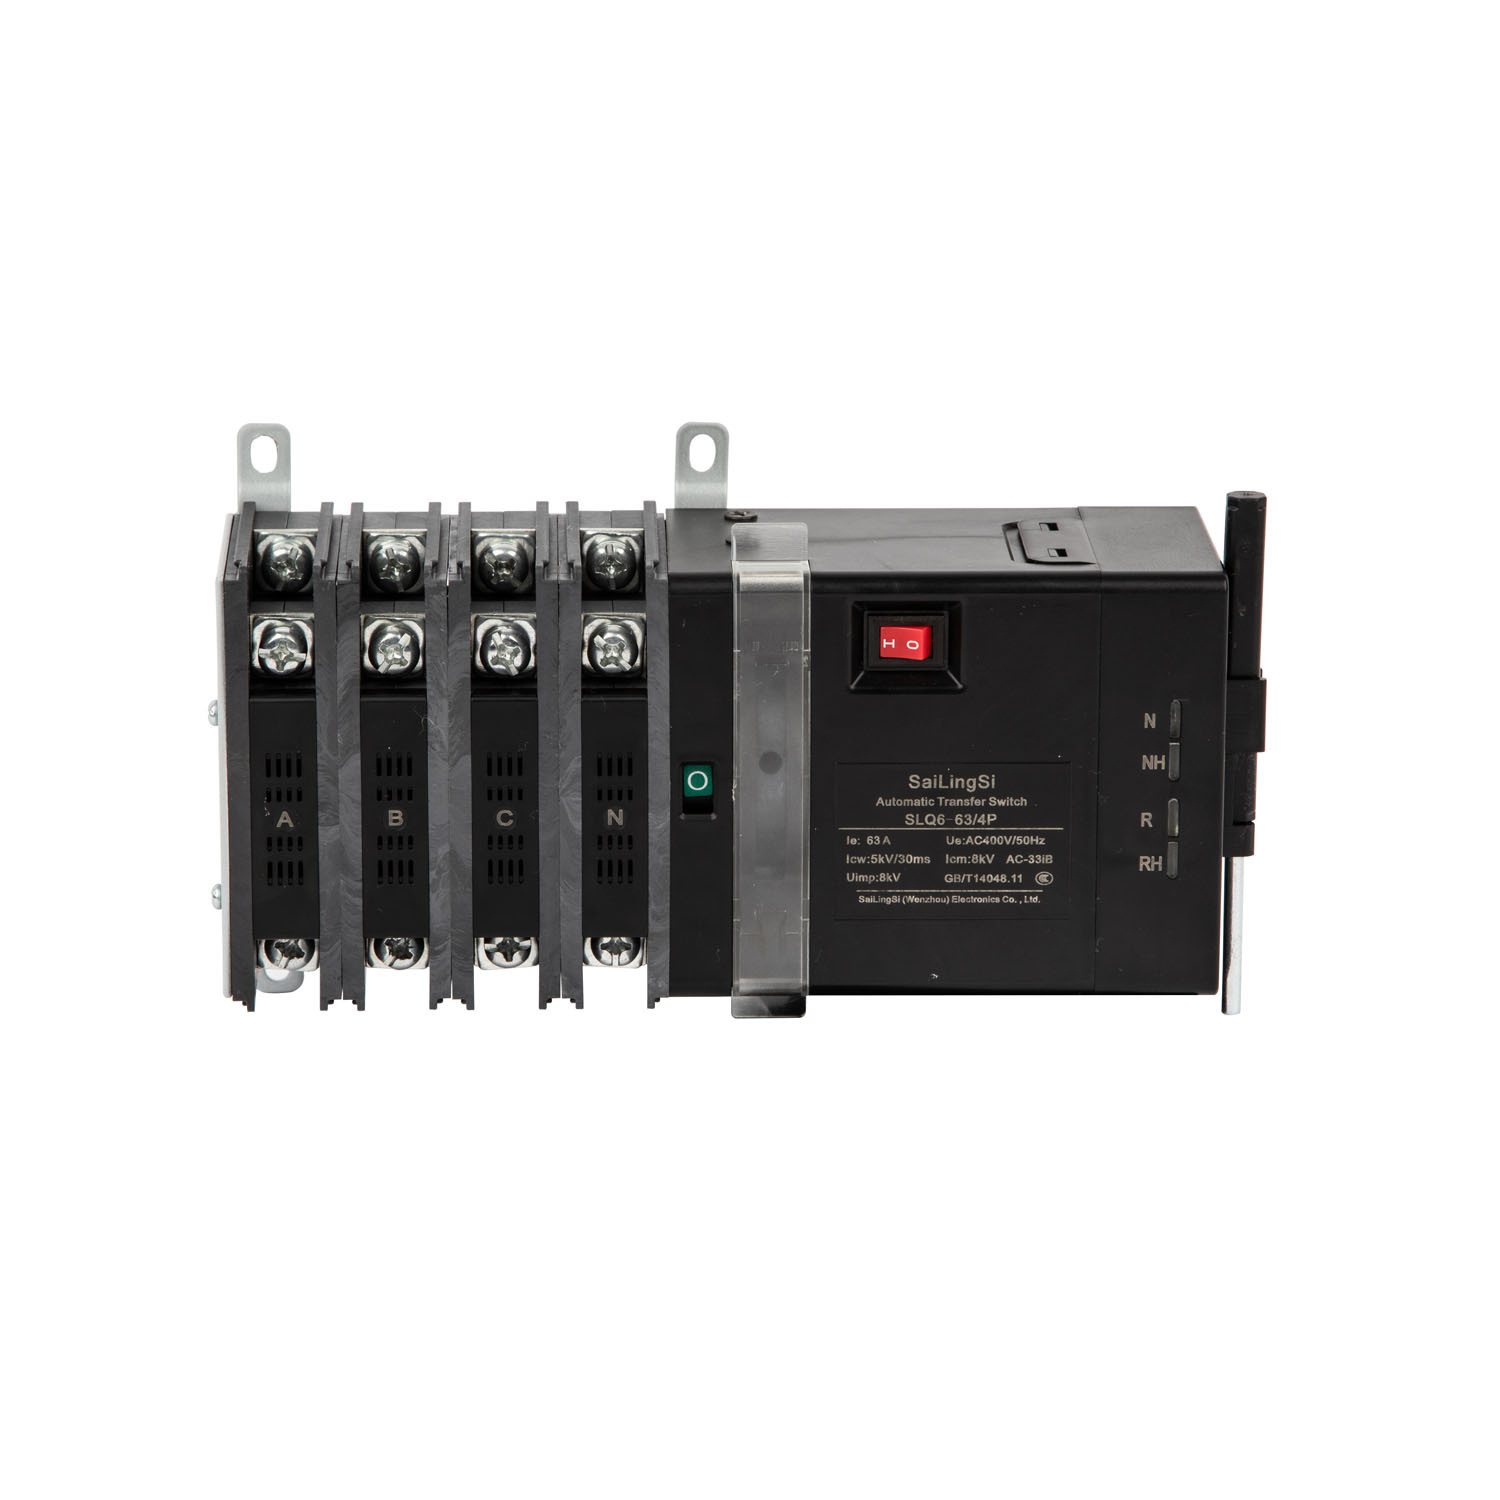 Solar Power to City Power ATS 250A 2p Automatic Transfer Switch ATS with Fire Control